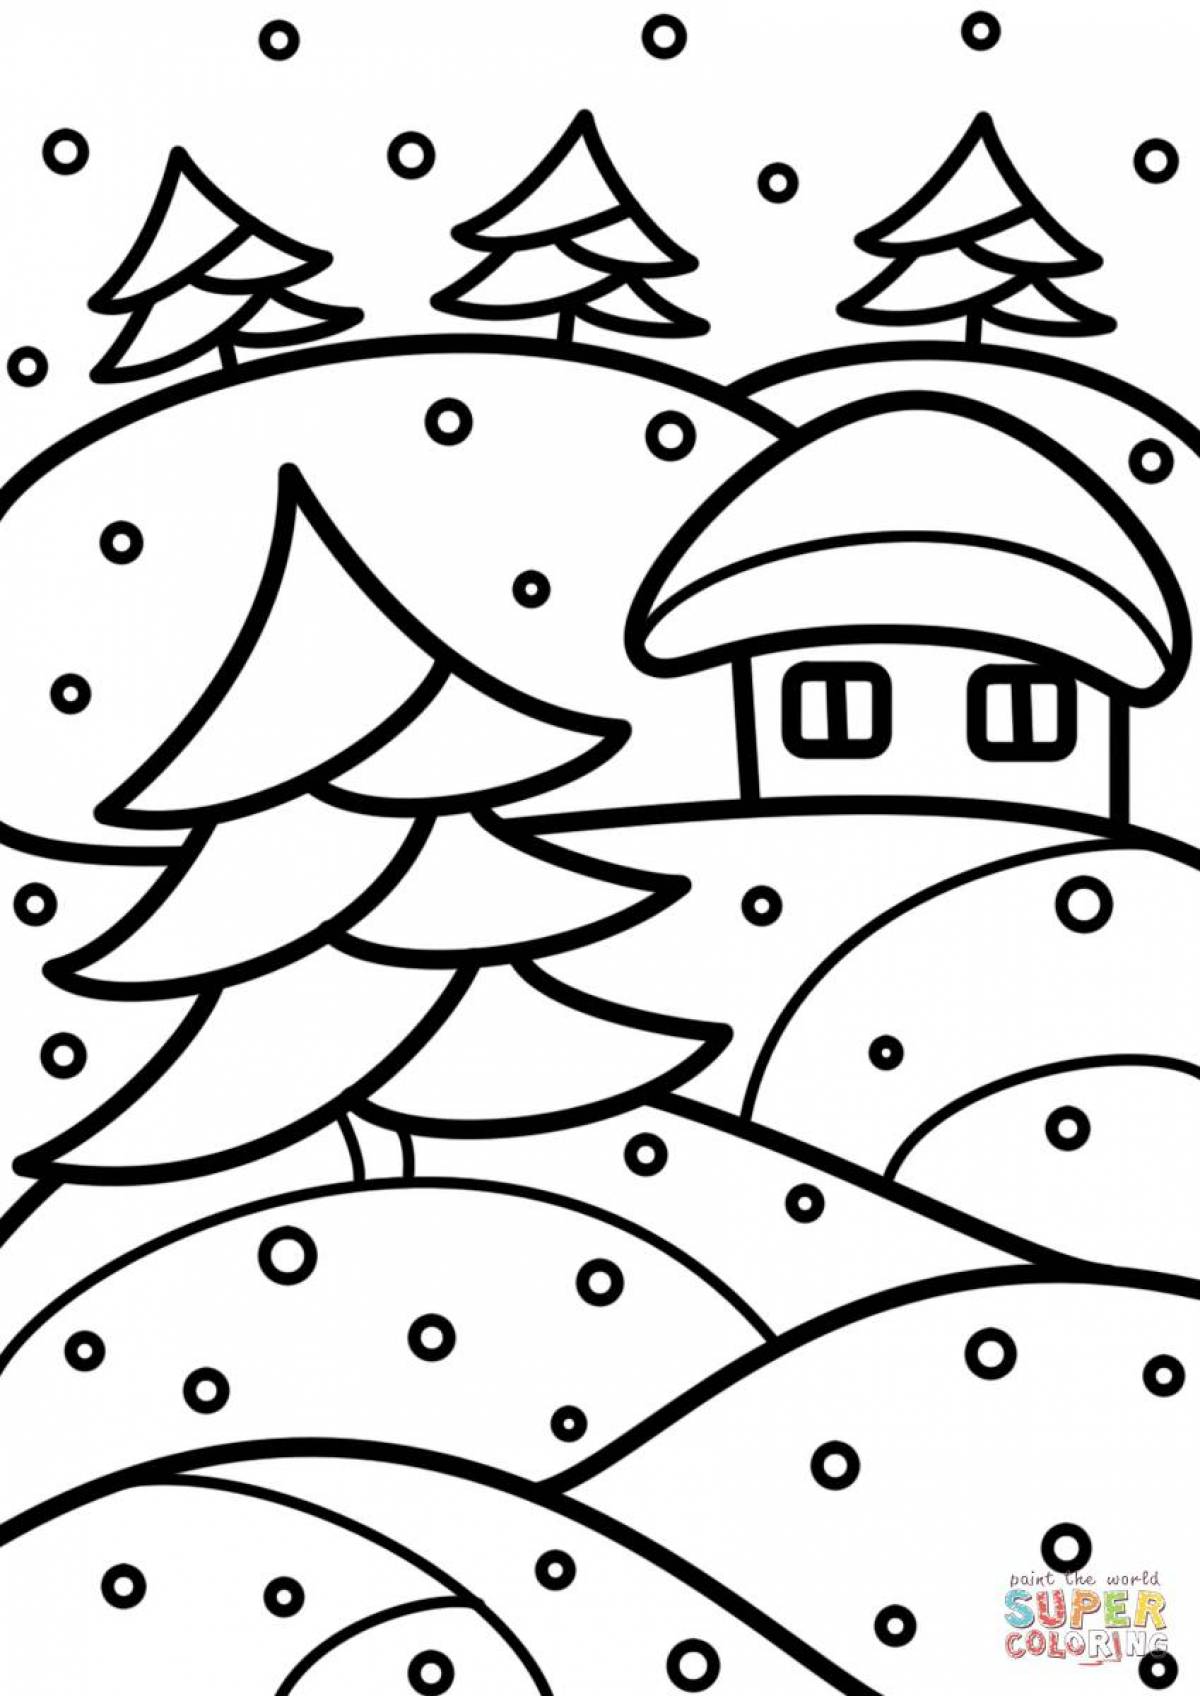 Luminous winter coloring book for children 6-7 years old